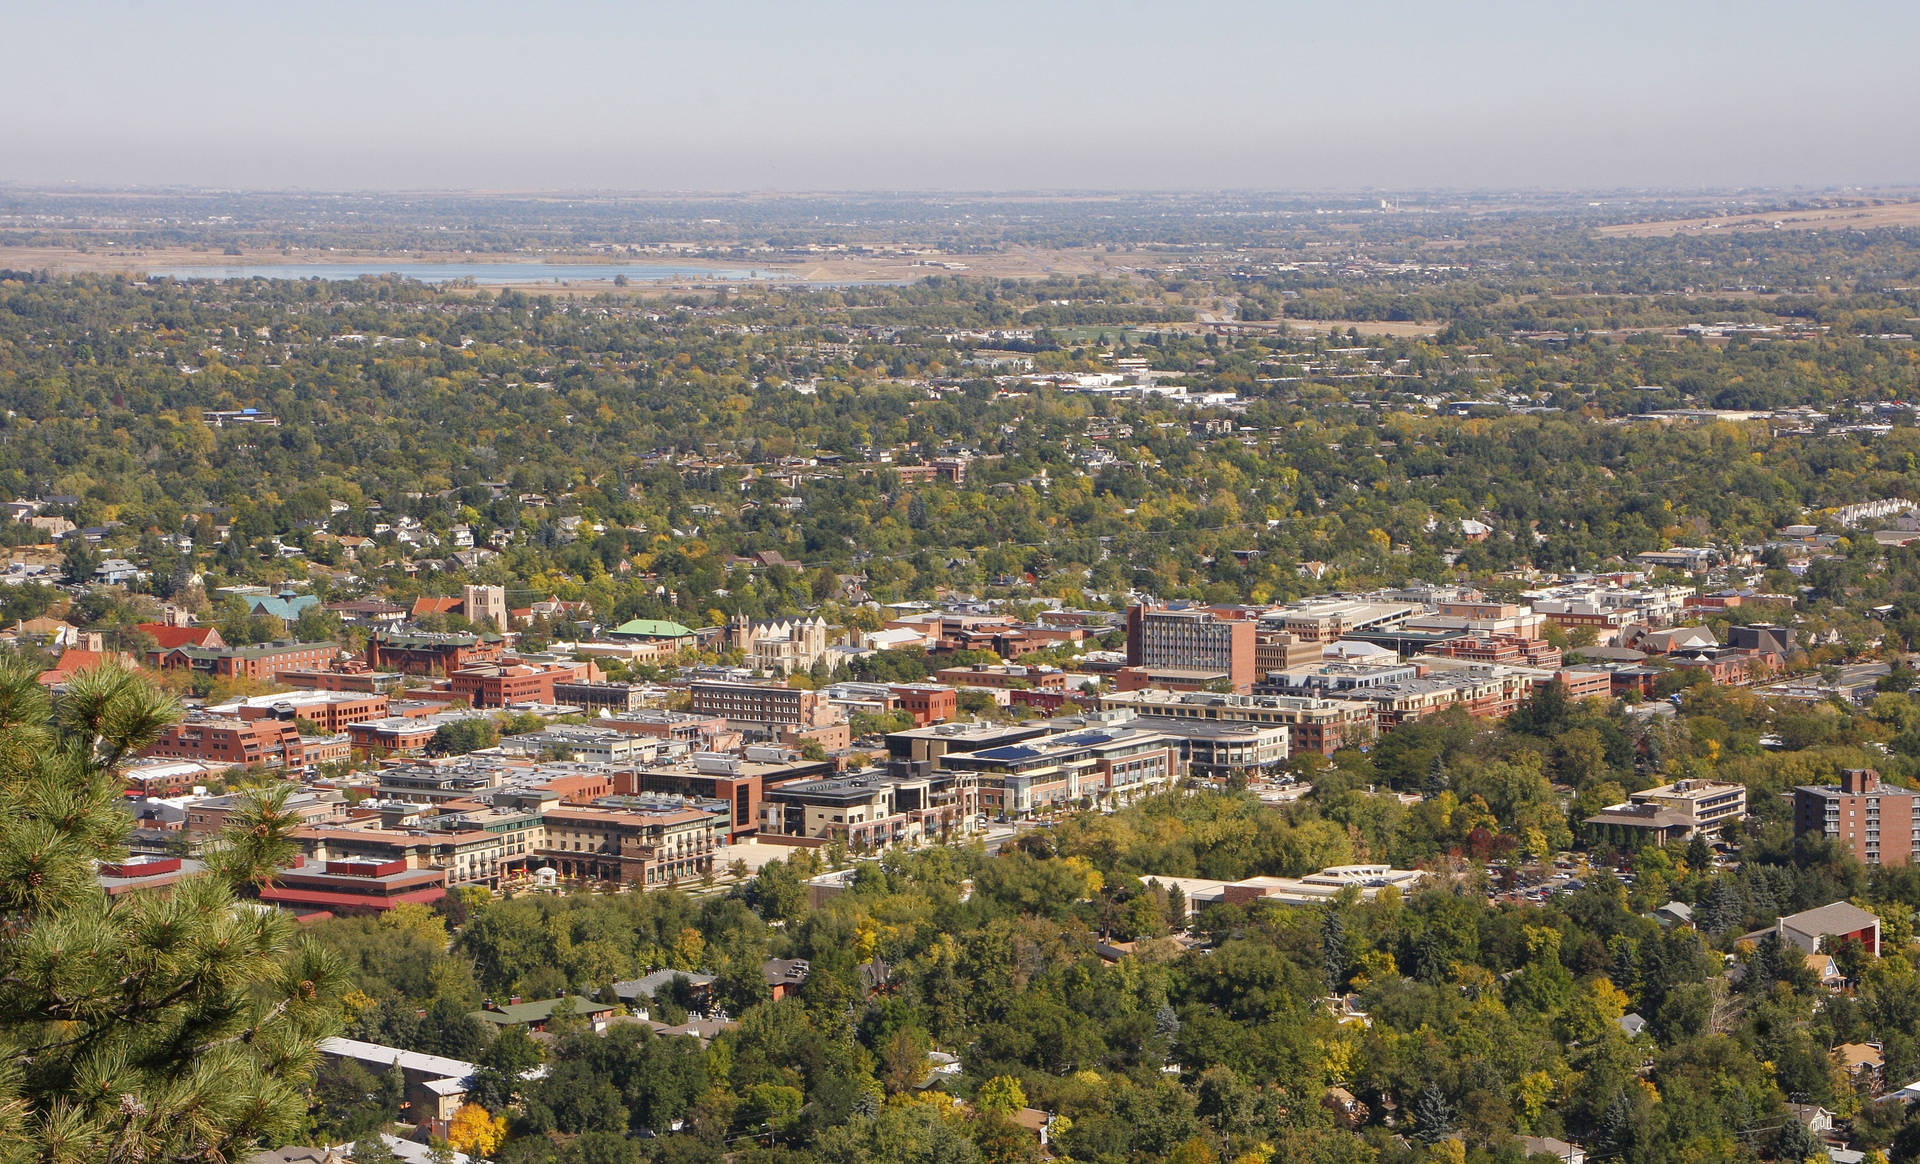 University Of Colorado And Its Surroundings Wallpaper